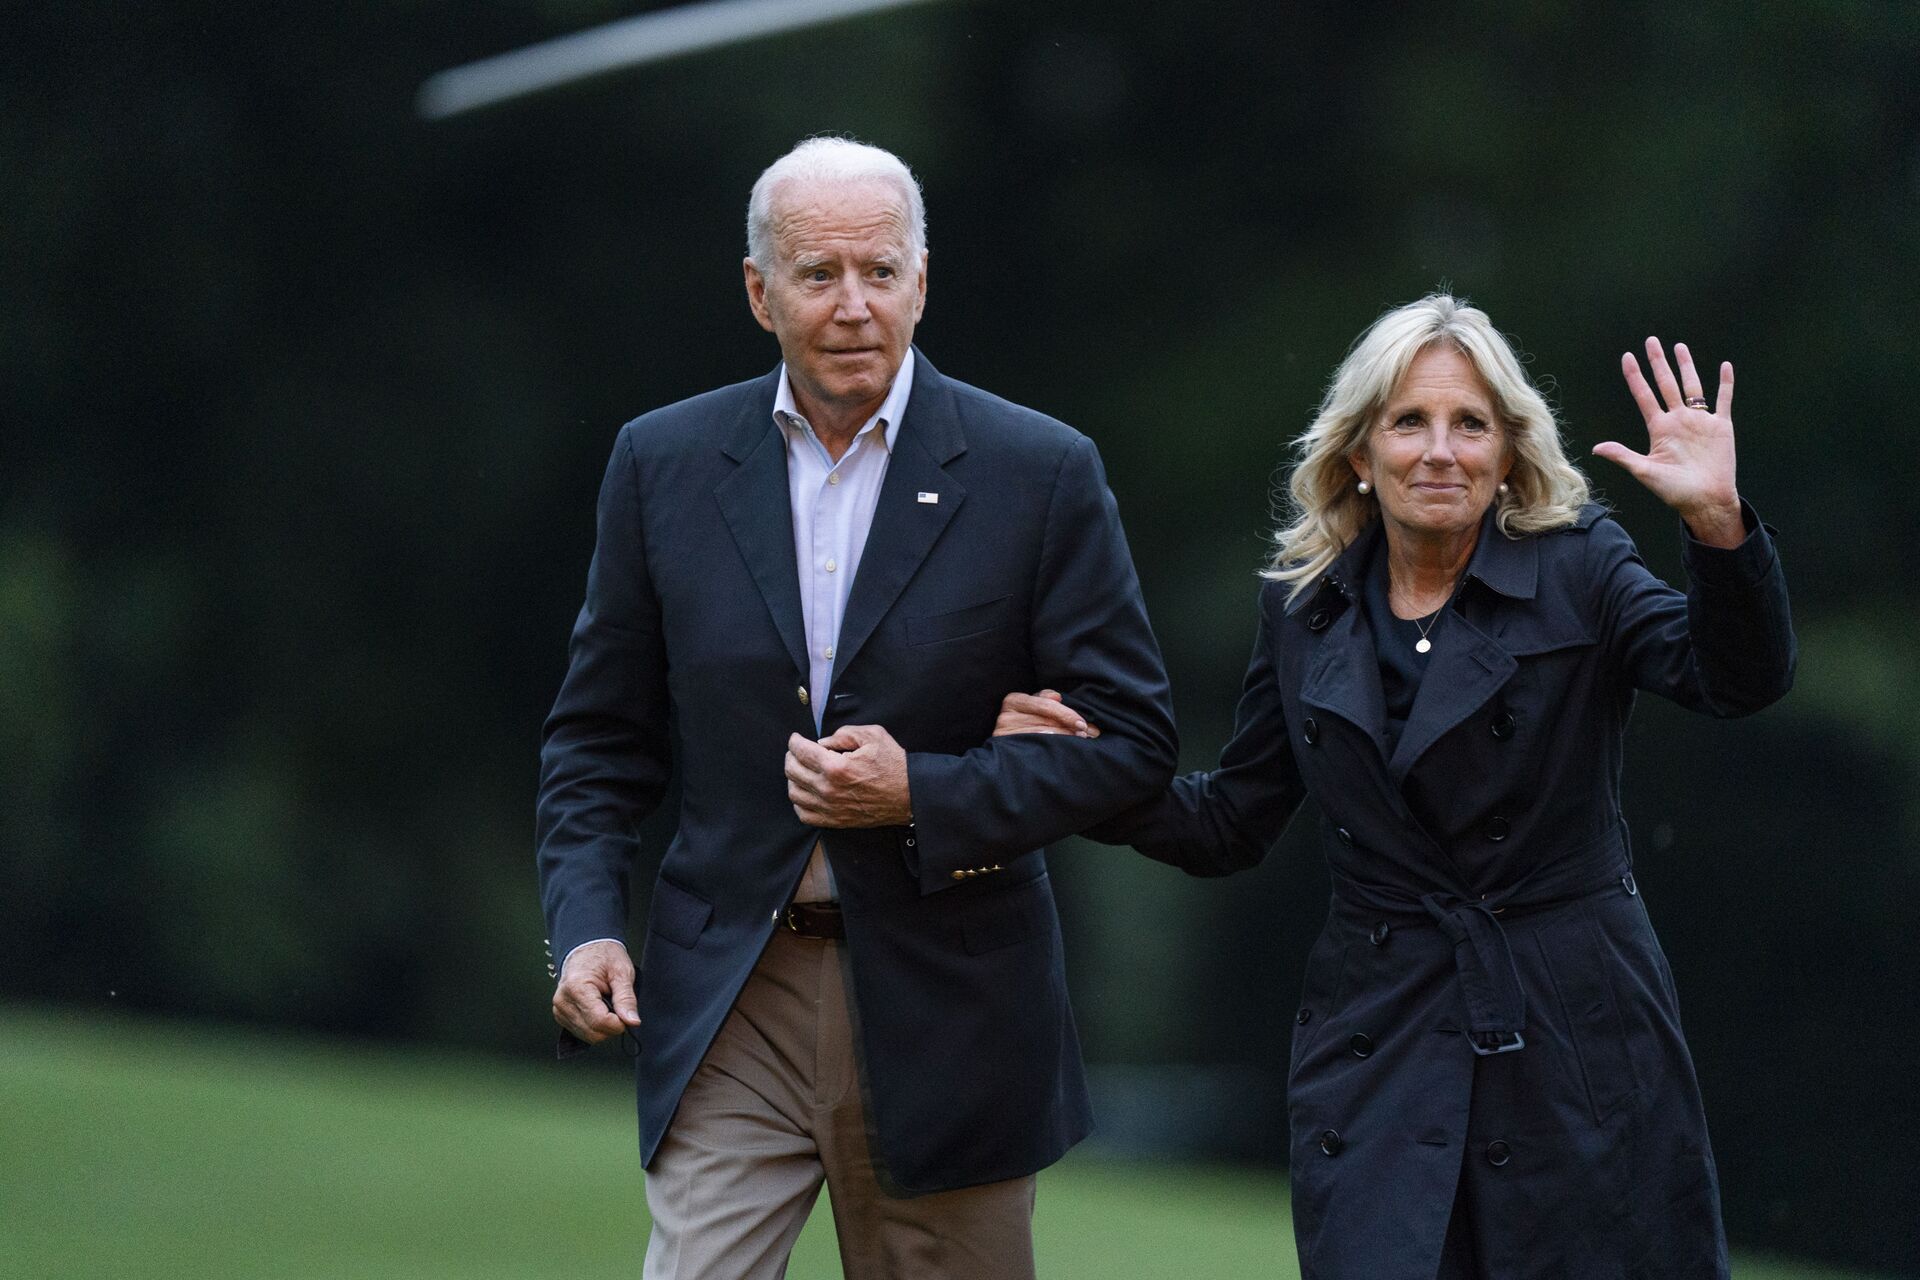 President Joe Biden with first lady Jill Biden returns to the the White House in Washington, Thursday, July 1, 2021, from a trip to Florida where he met with first responders and family members from condo tower in Surfside, Fla., that collapsed last week - Sputnik International, 1920, 07.09.2021